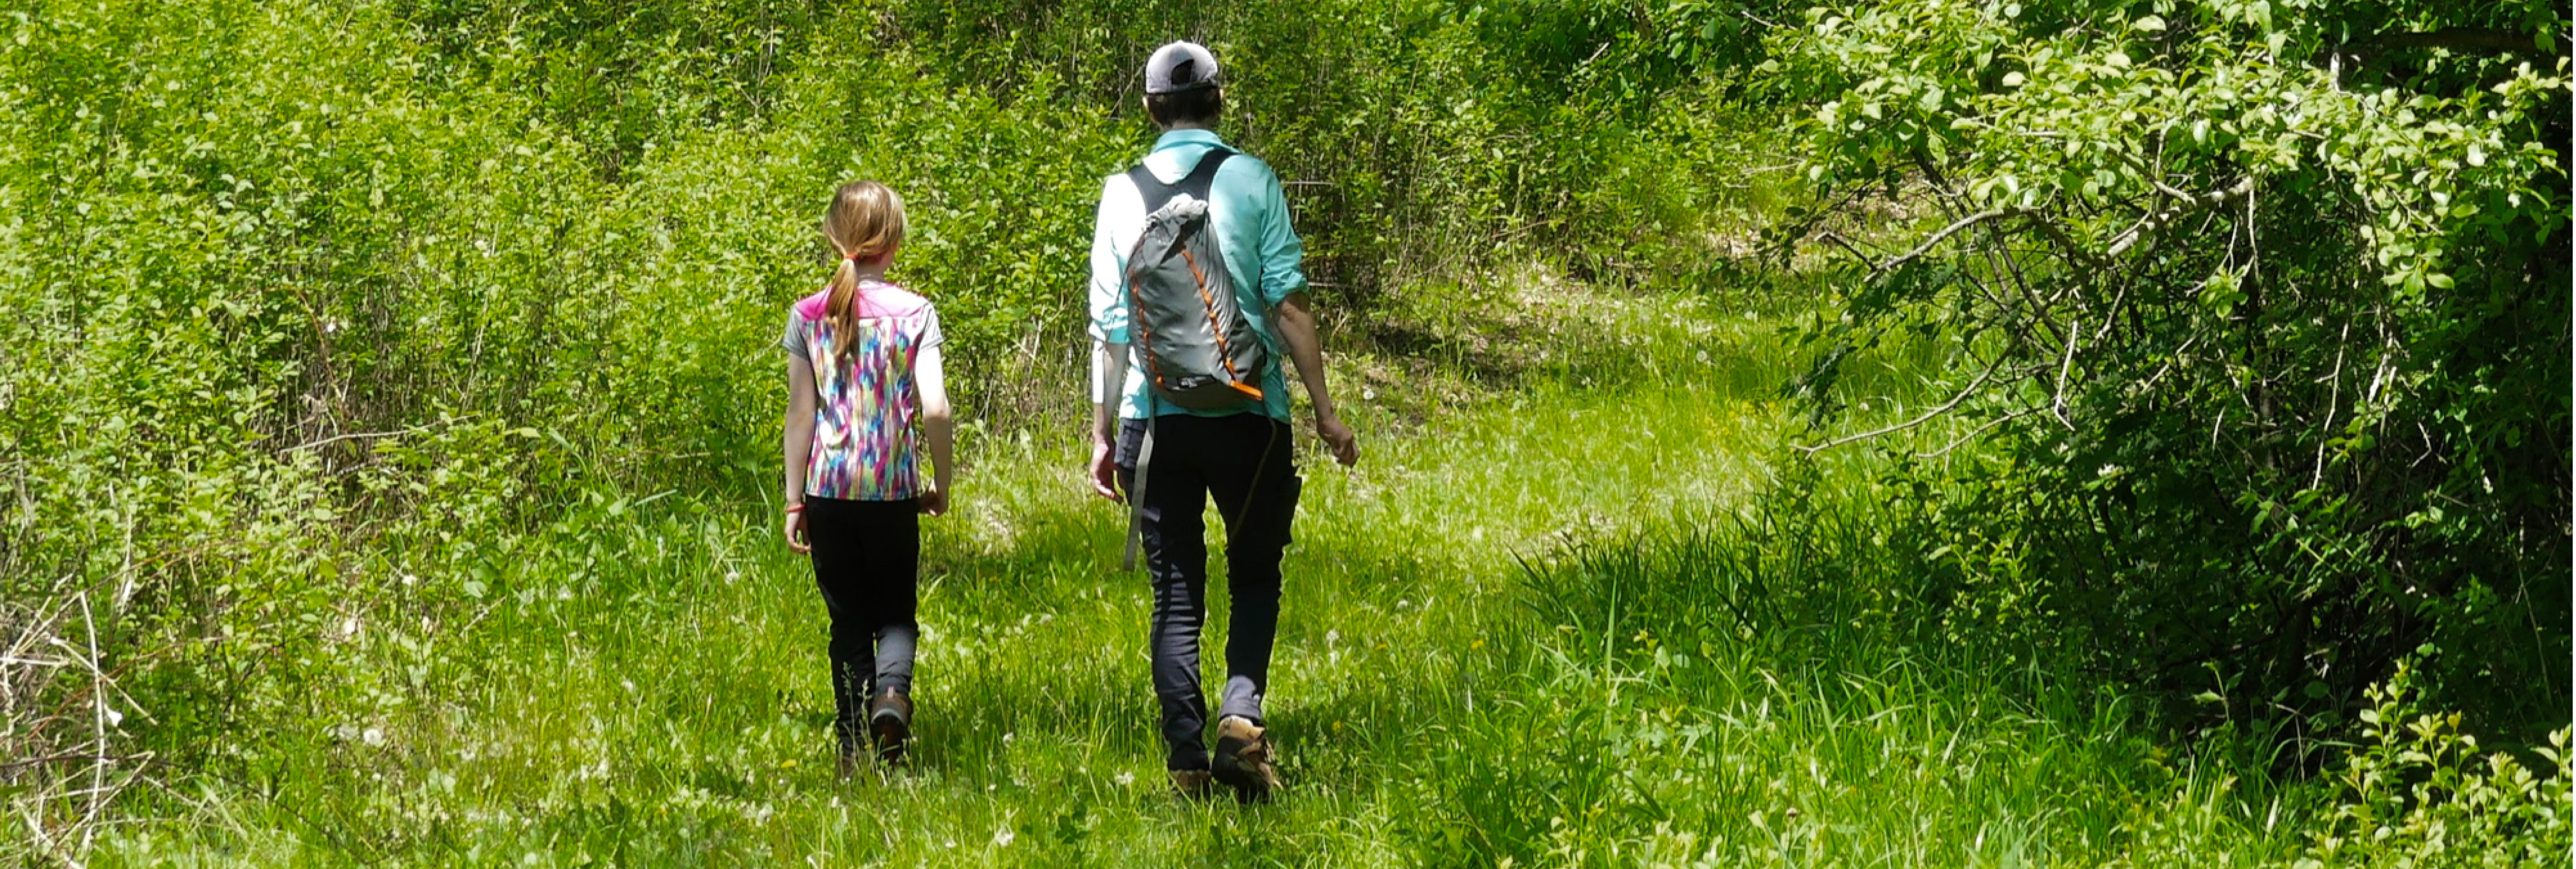 Young girl walking next to adult woman on nature trail